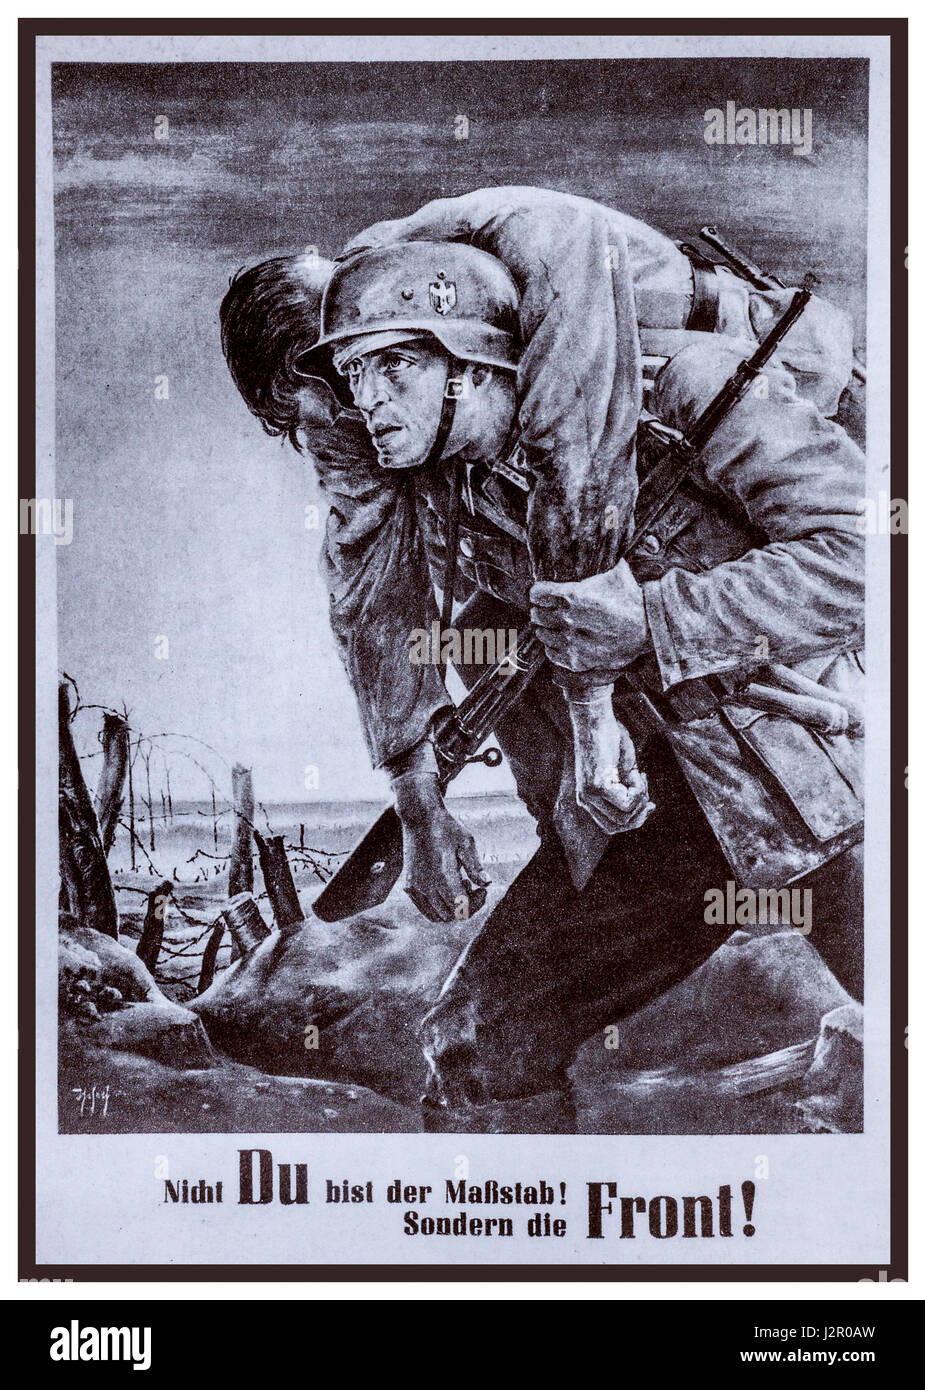 World War 2 German Propaganda recruitment poster showing a German soldier on the battlefield, carrying wounded comrade asking 'are YOU not the standard especially at The Front' ! Stock Photo